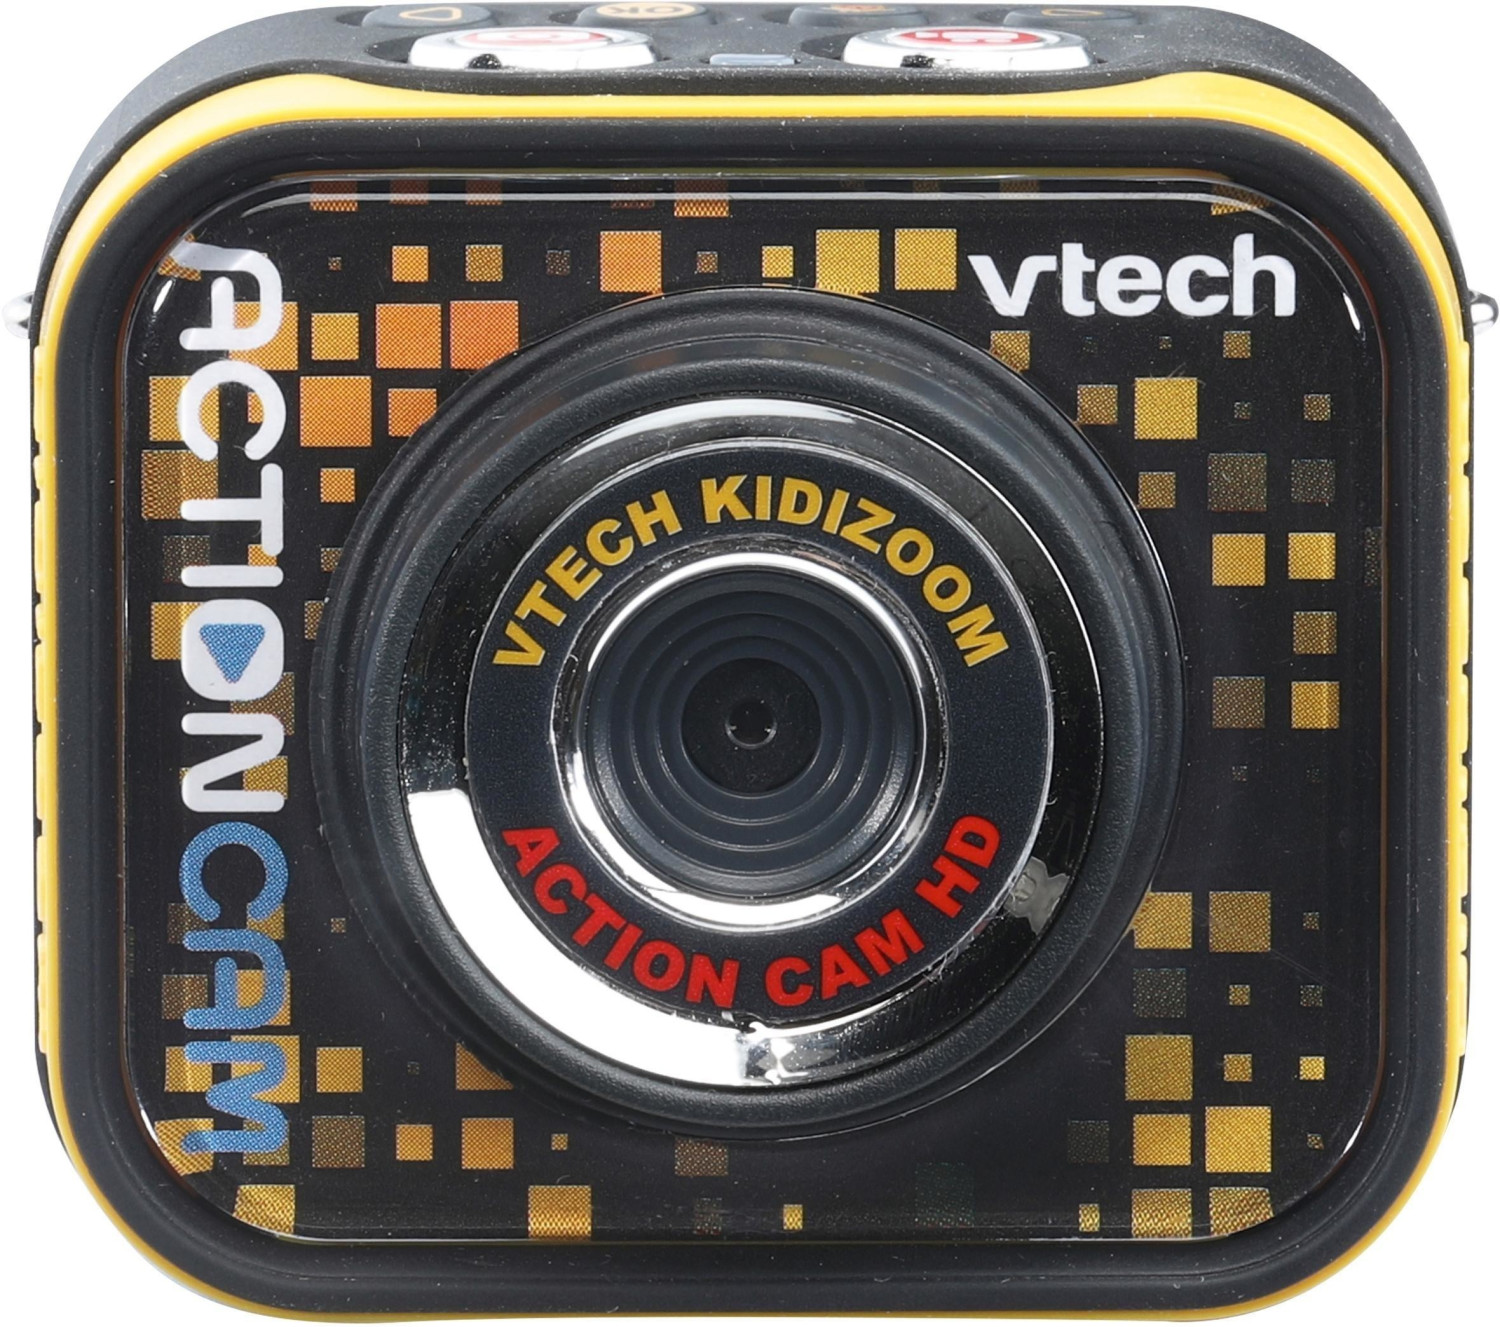 Photos - Interactive Toy Vtech Kidizoom Action Cam HD 